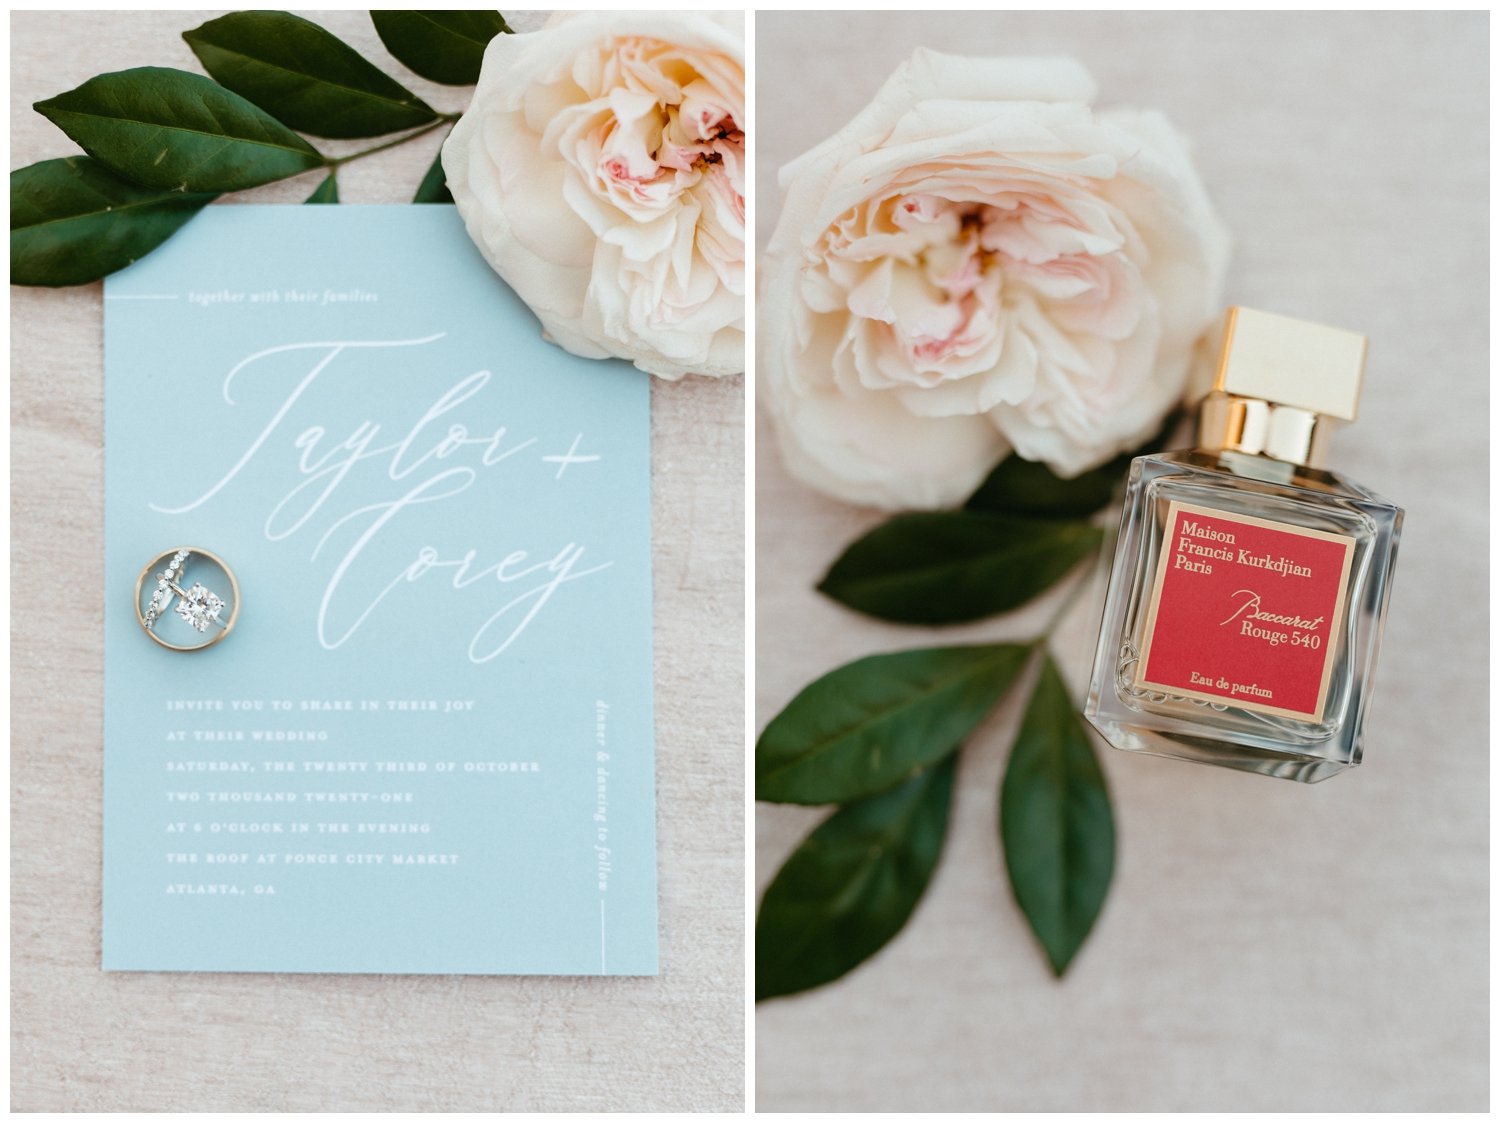 The invitation to the Ponce City Market wedding with flowers and perfume